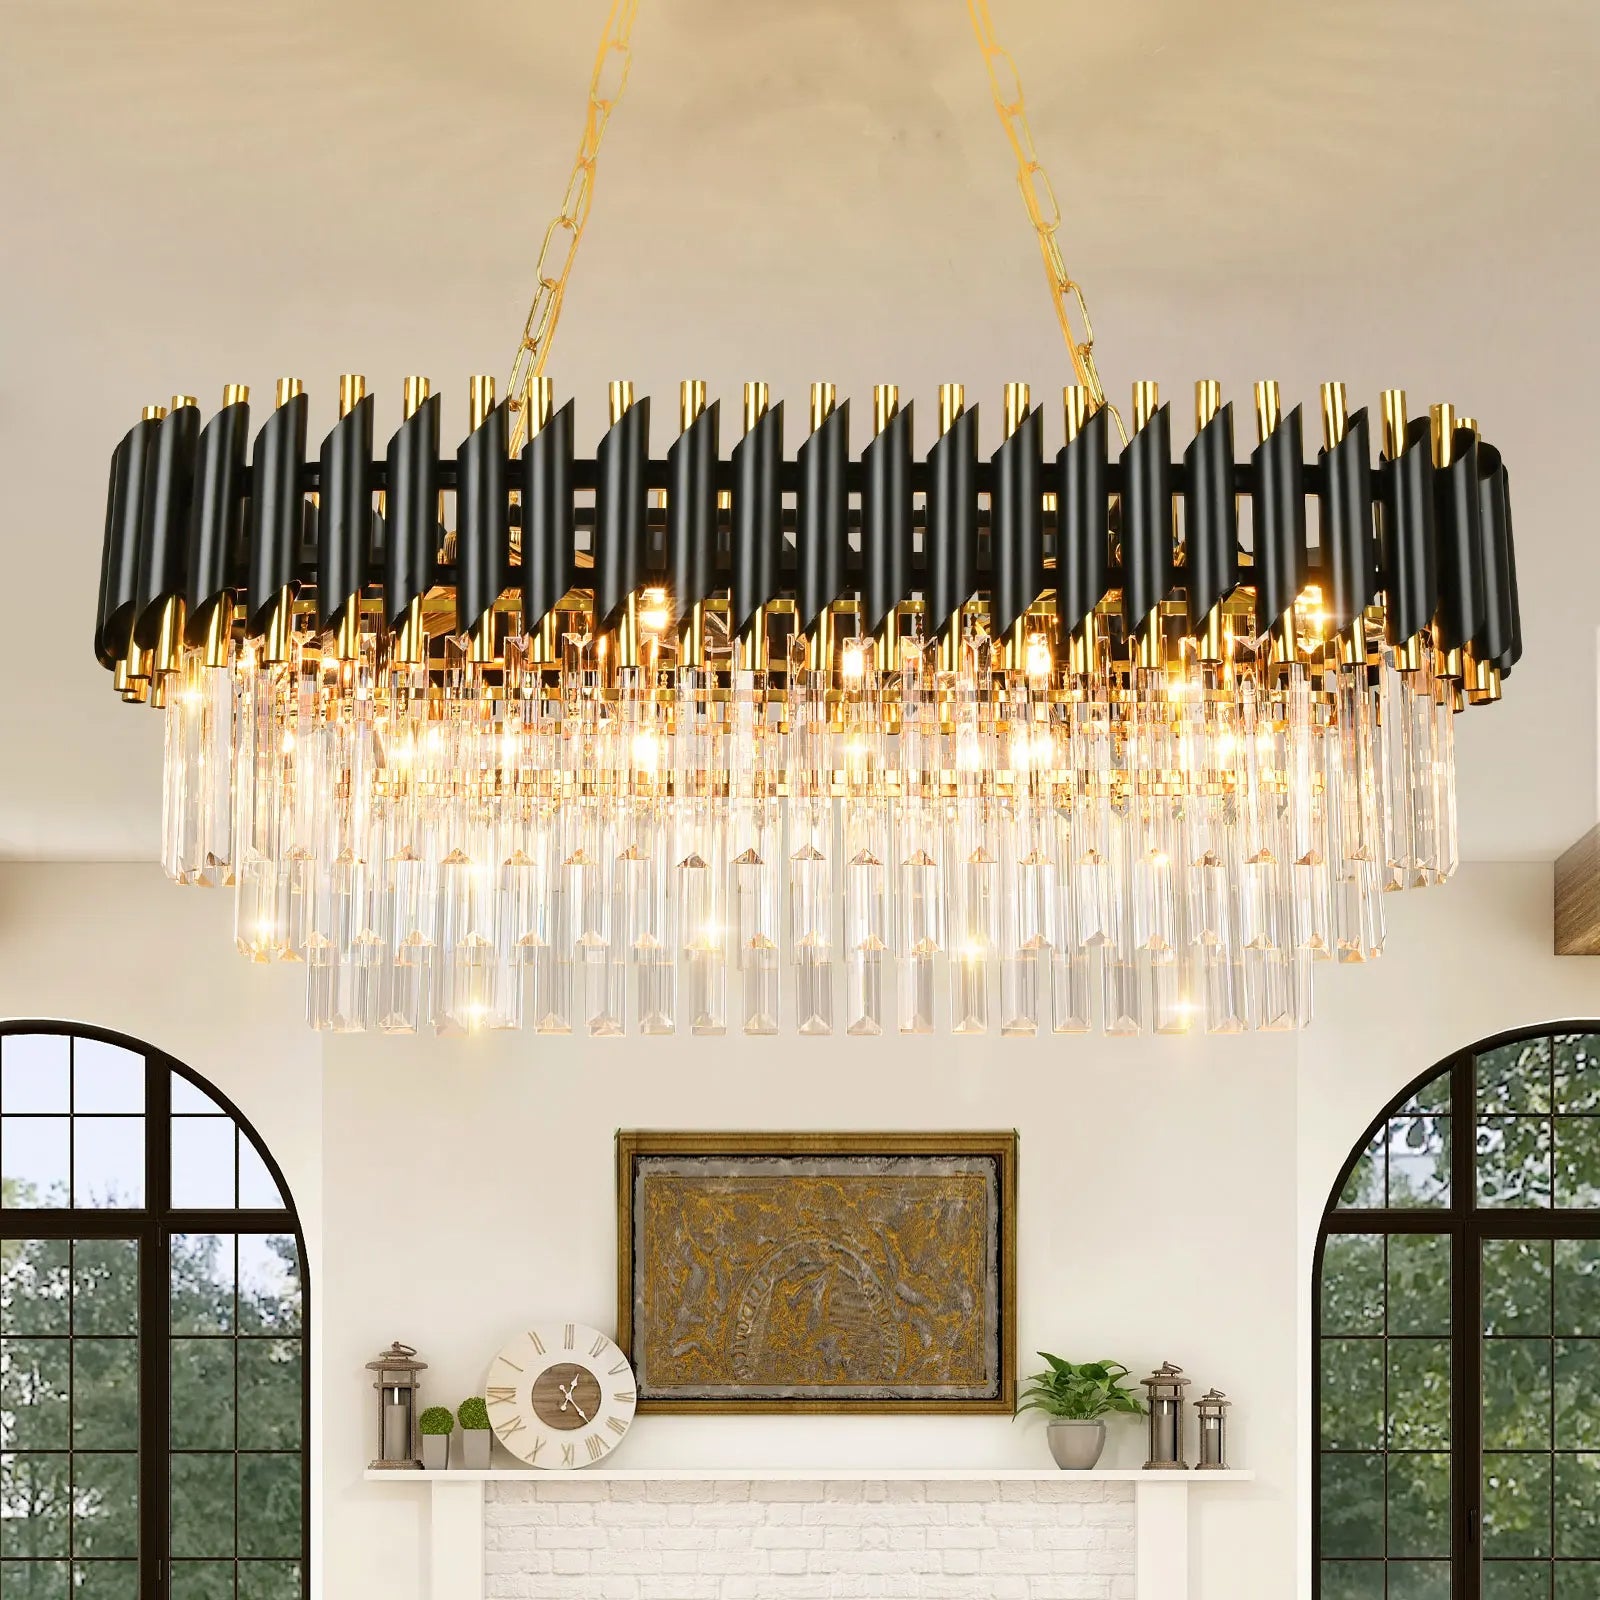 An elegant Verano Crystal Dining Room Light Fixture from Morsale.com with multiple tiers of cylindrical glass pieces hangs from a gold chain in the center of a room, exemplifying contemporary design. The dimmable chandelier features a mix of black and gold elements. Below, a white mantelpiece with decor items sits against a wall with two tall, arched windows.